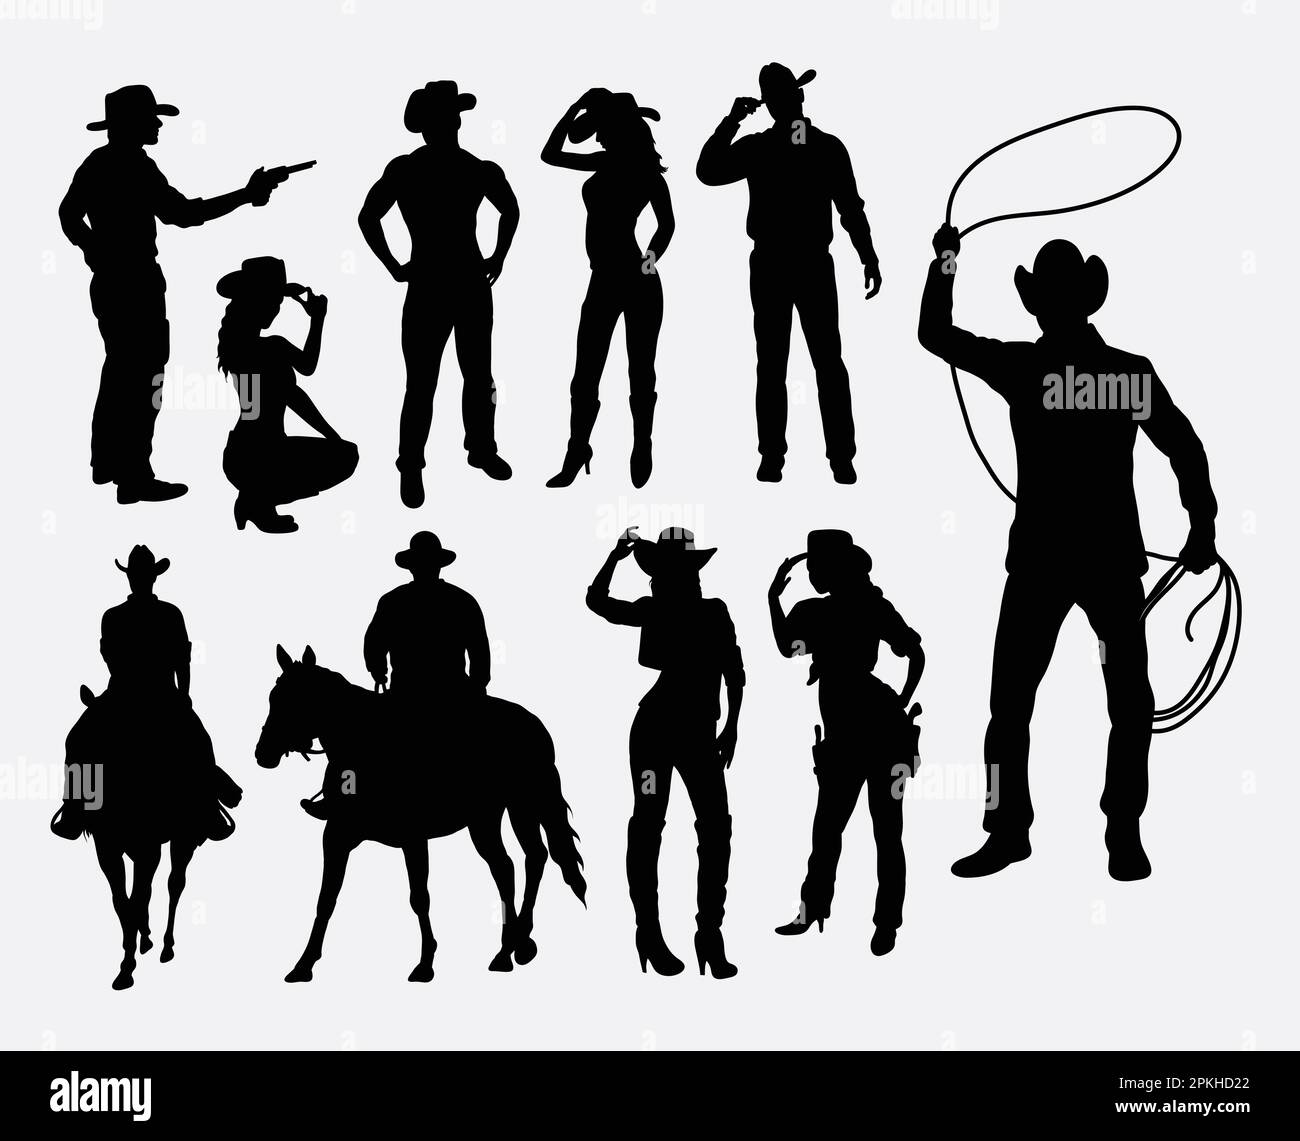 Cowboy and cowgirl silhouettes Stock Vector